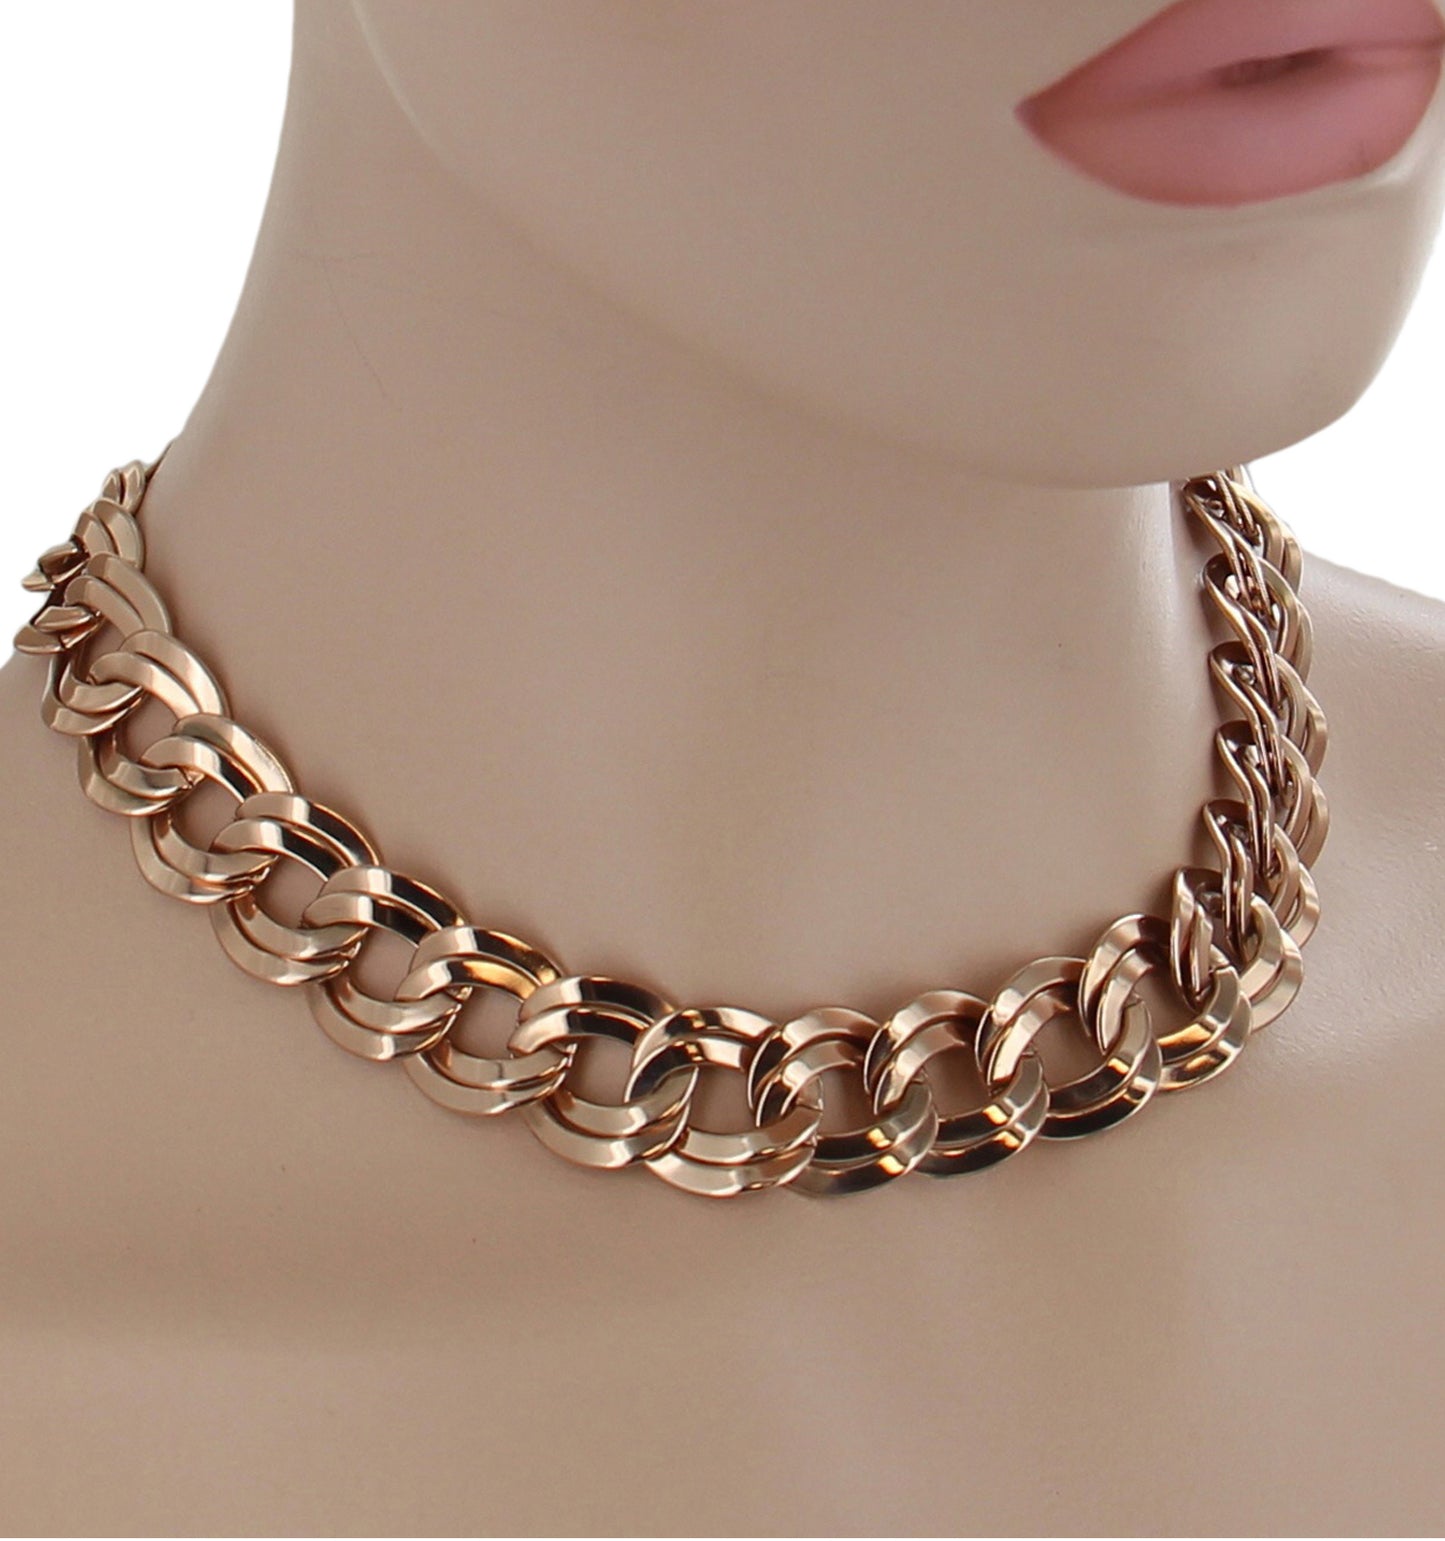 Ky & Co USA Rose Gold Tone Chunky Double Link Thick Chain Statement Necklace 18"